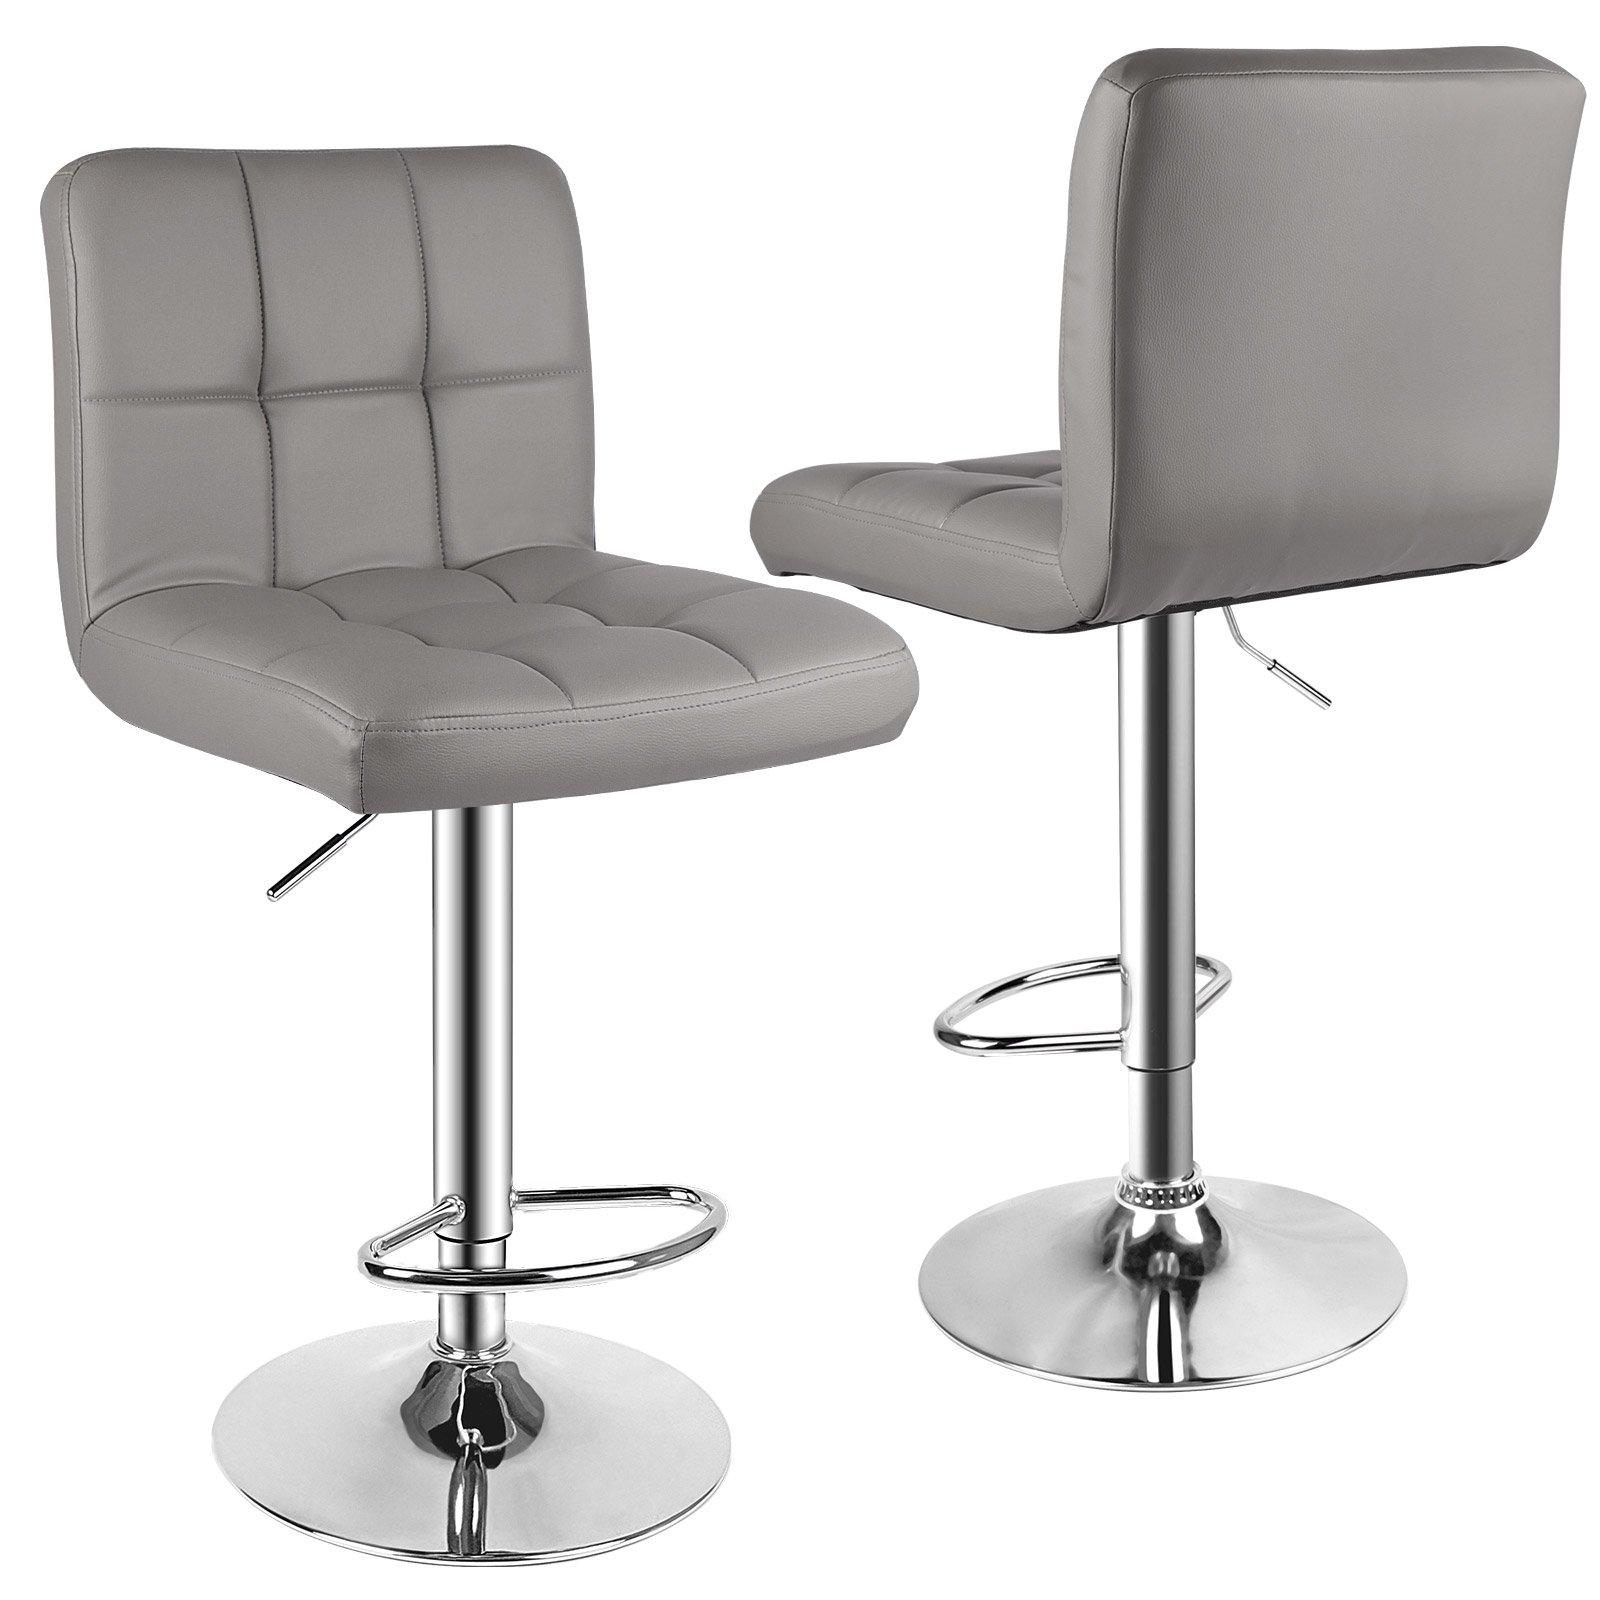 Bar Stools Set of 2 PU Leather Swivel Height Adjustable Bar Chairs With Backrest For Breakfast Bar, 